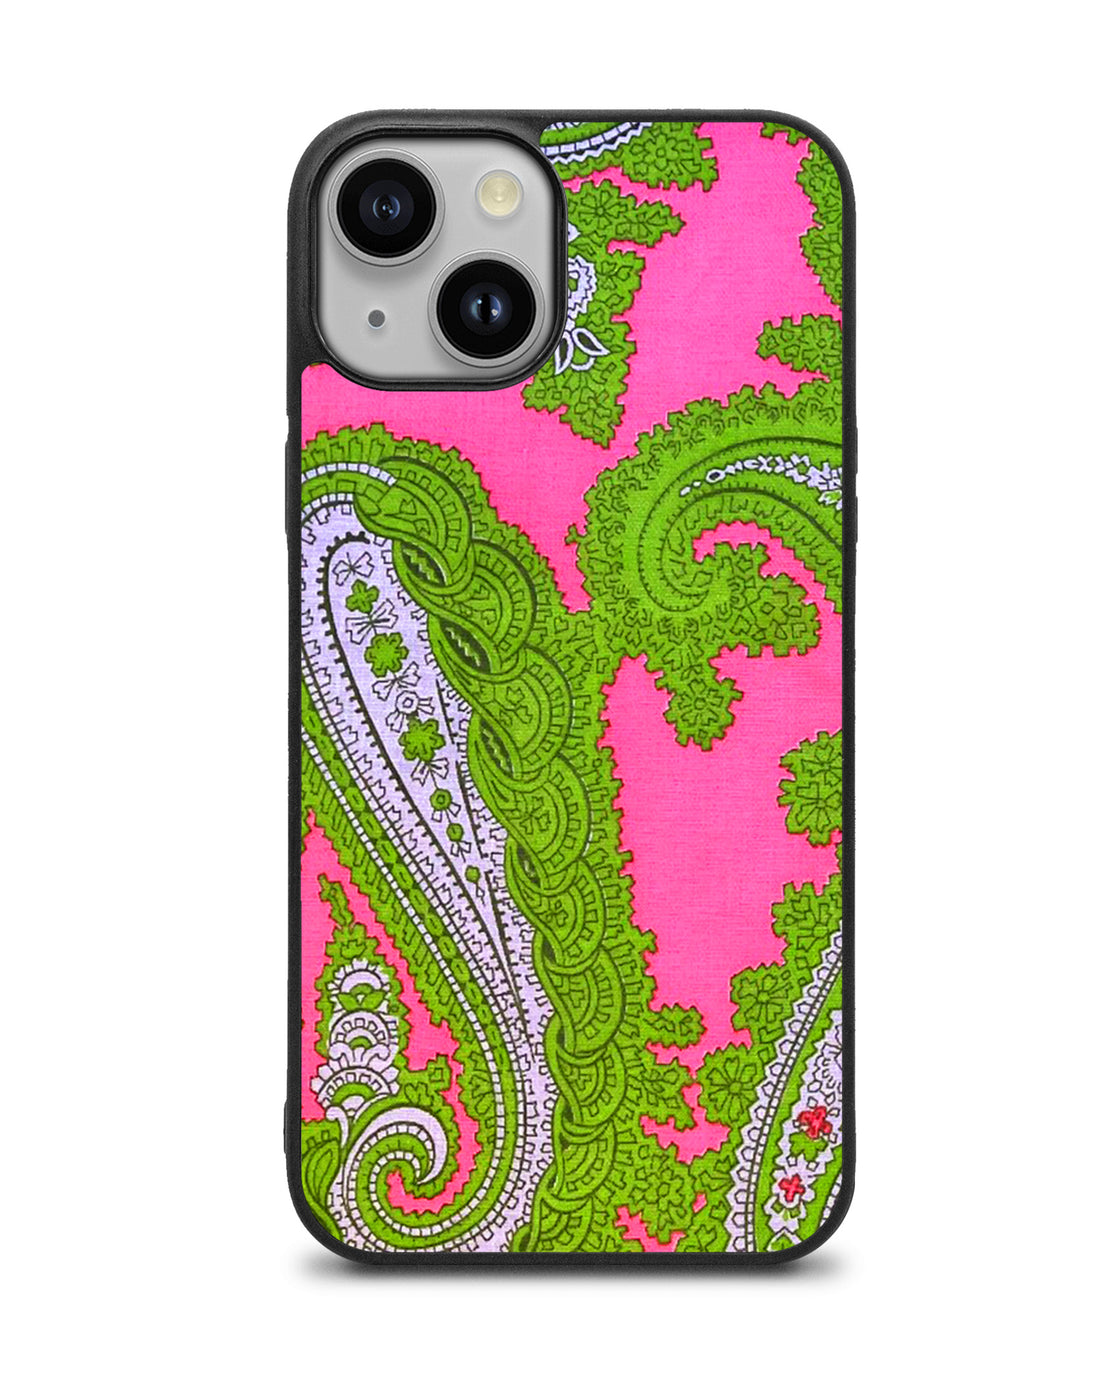 Funky Paisley iPhone Case